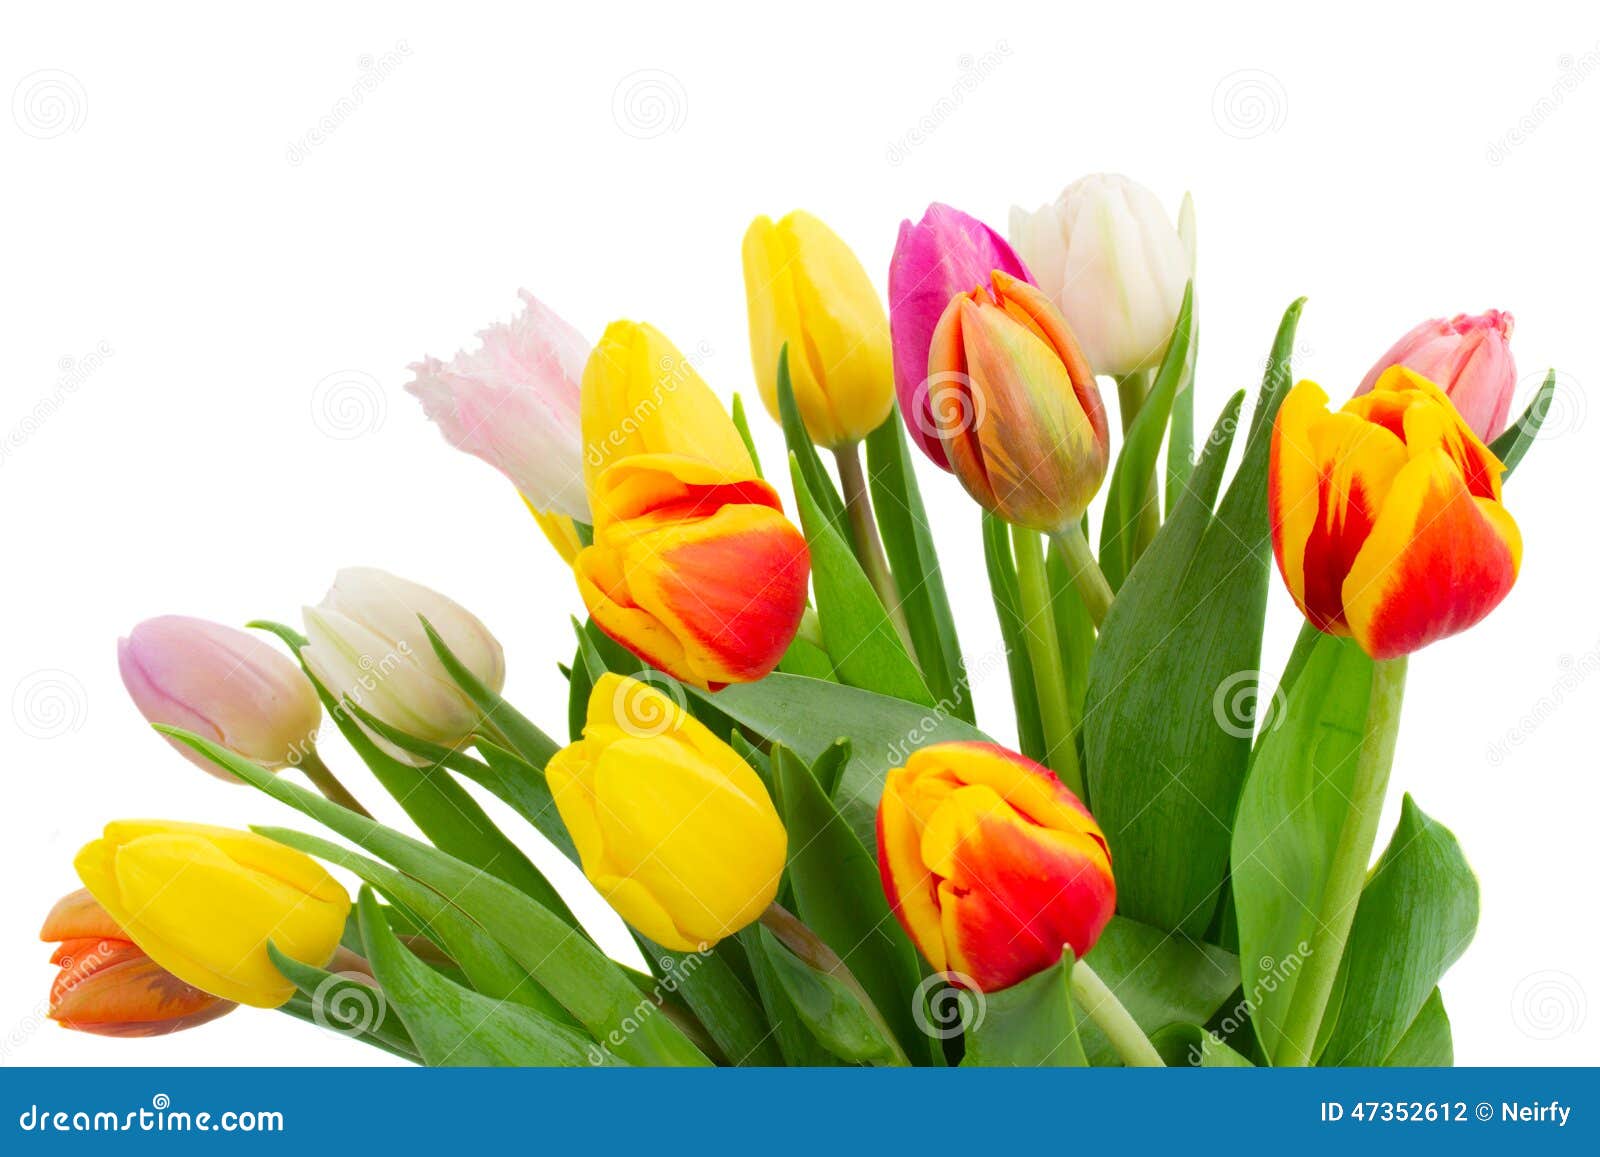 Bouquet of Multicolored Tulip Flowers in White Stock Photo - Image of ...